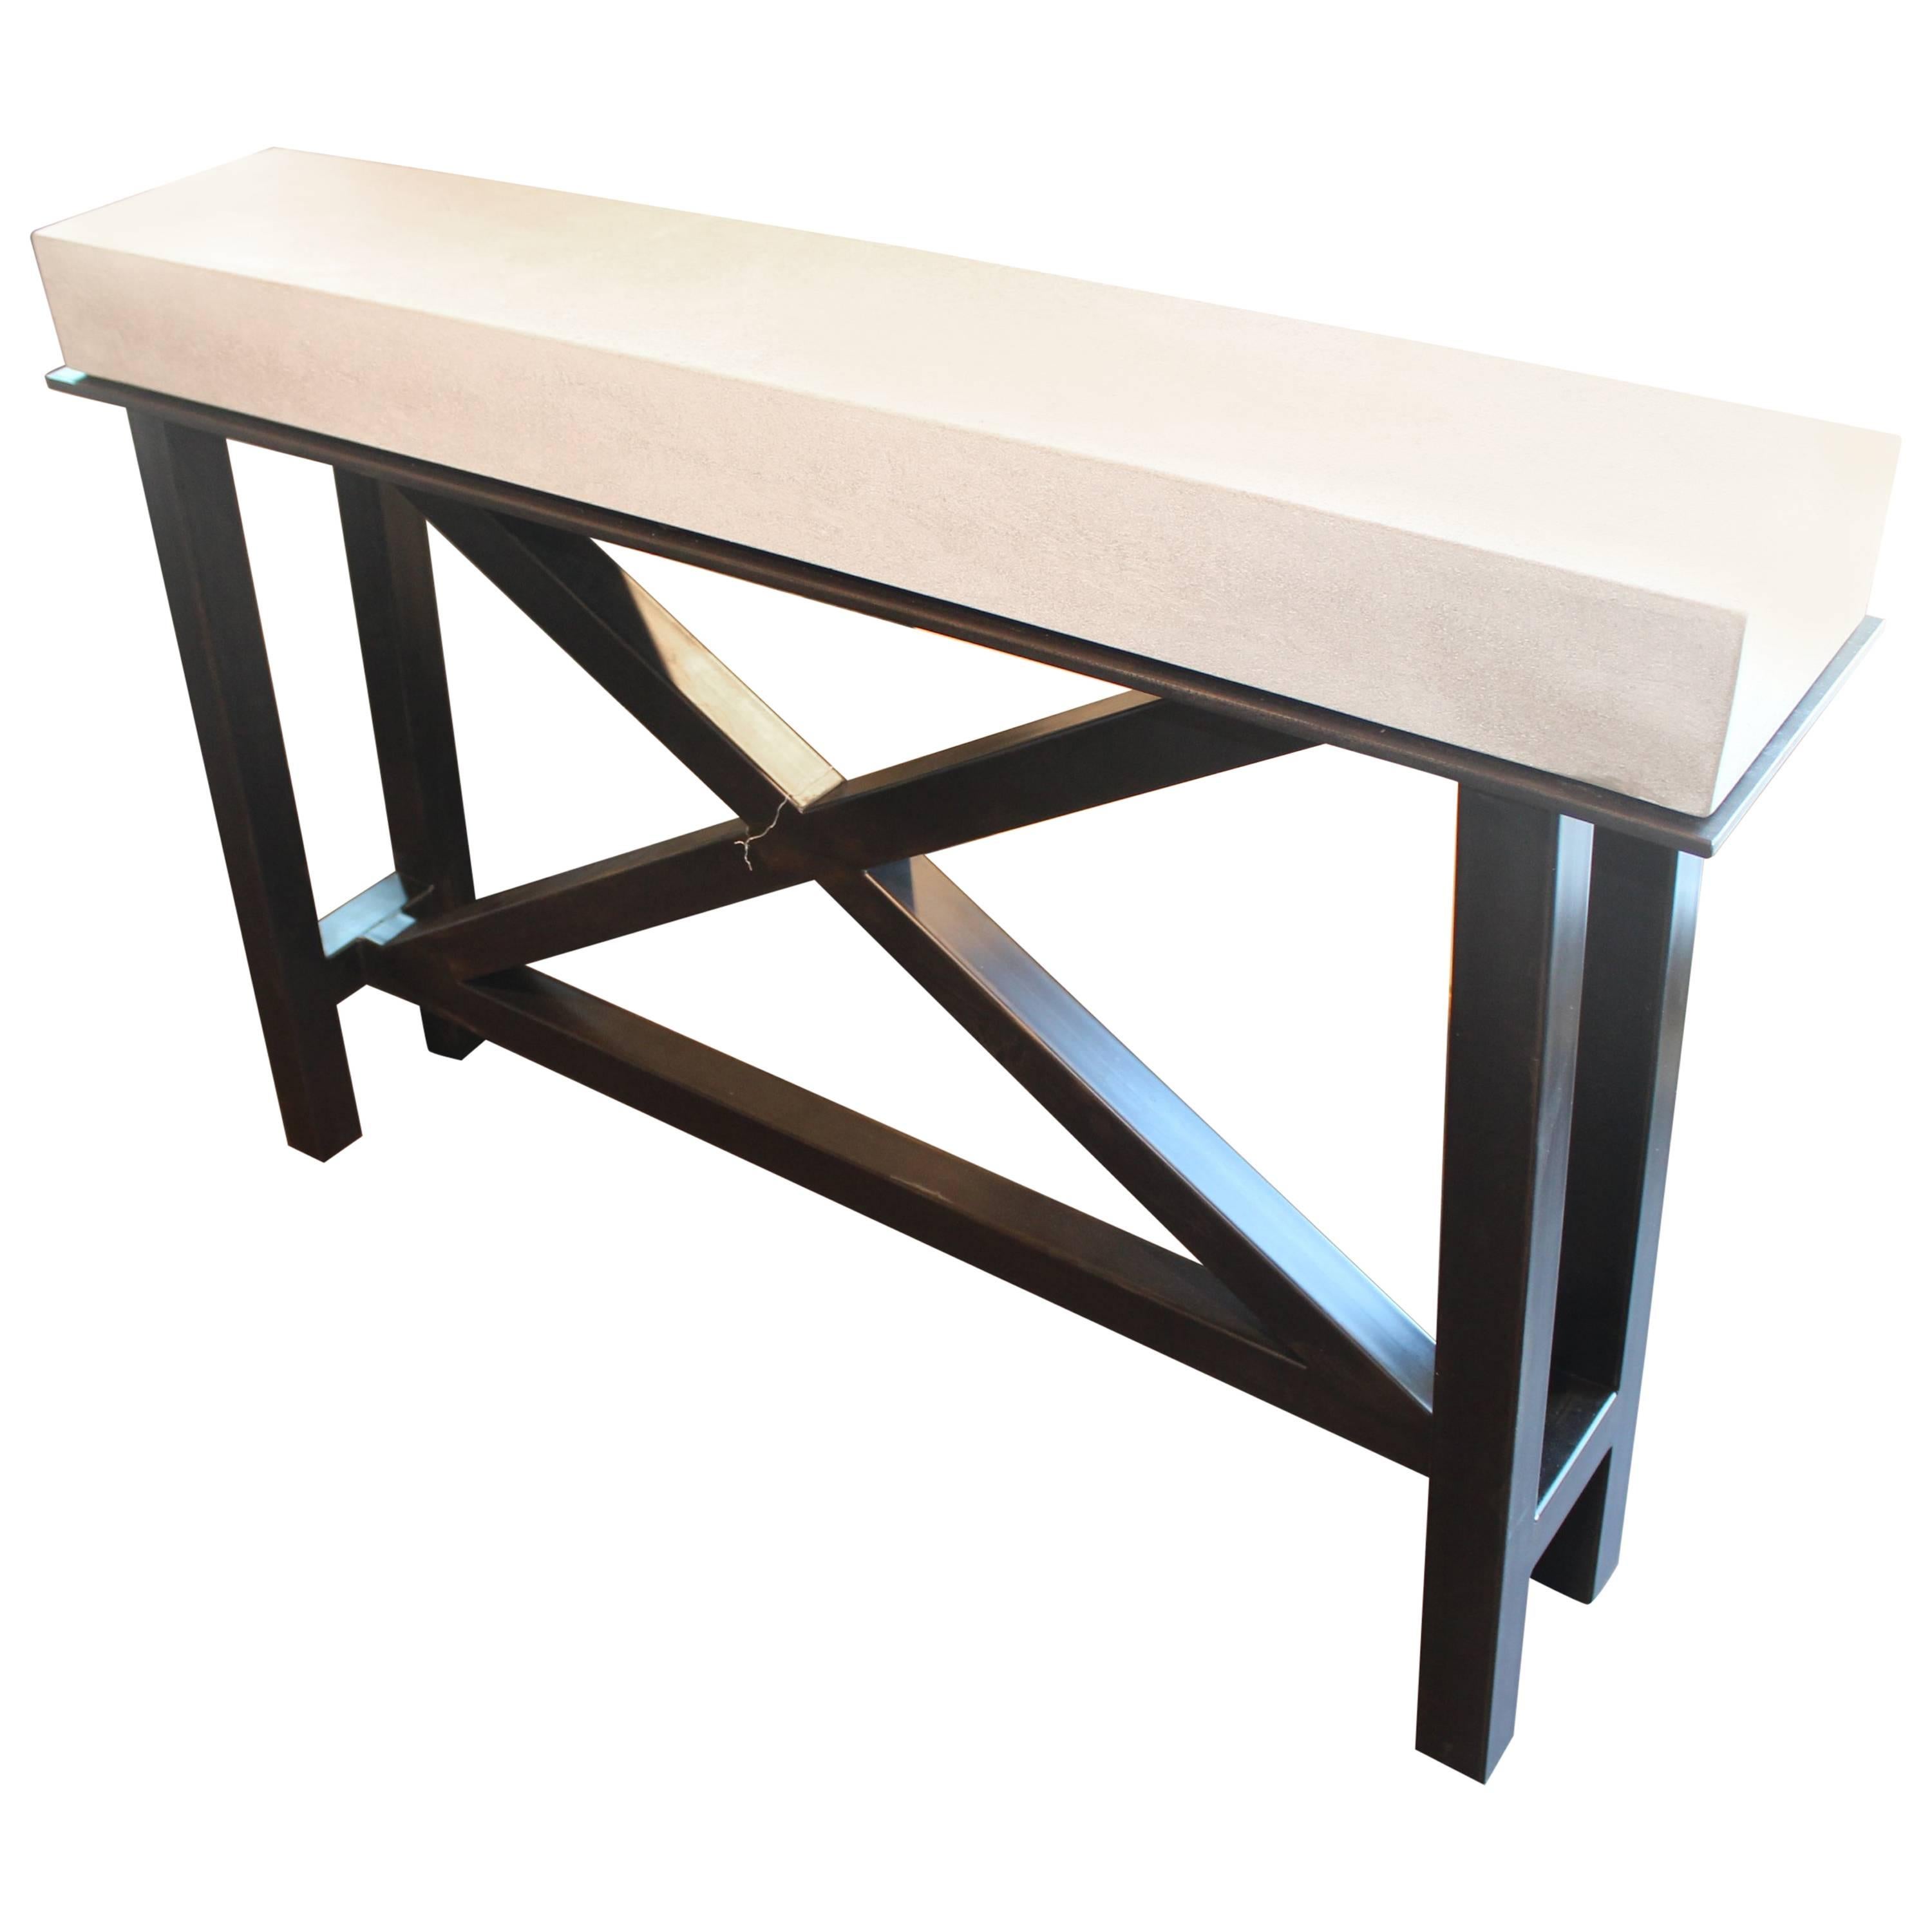 "X" Motif Steel Console with Limestone Top